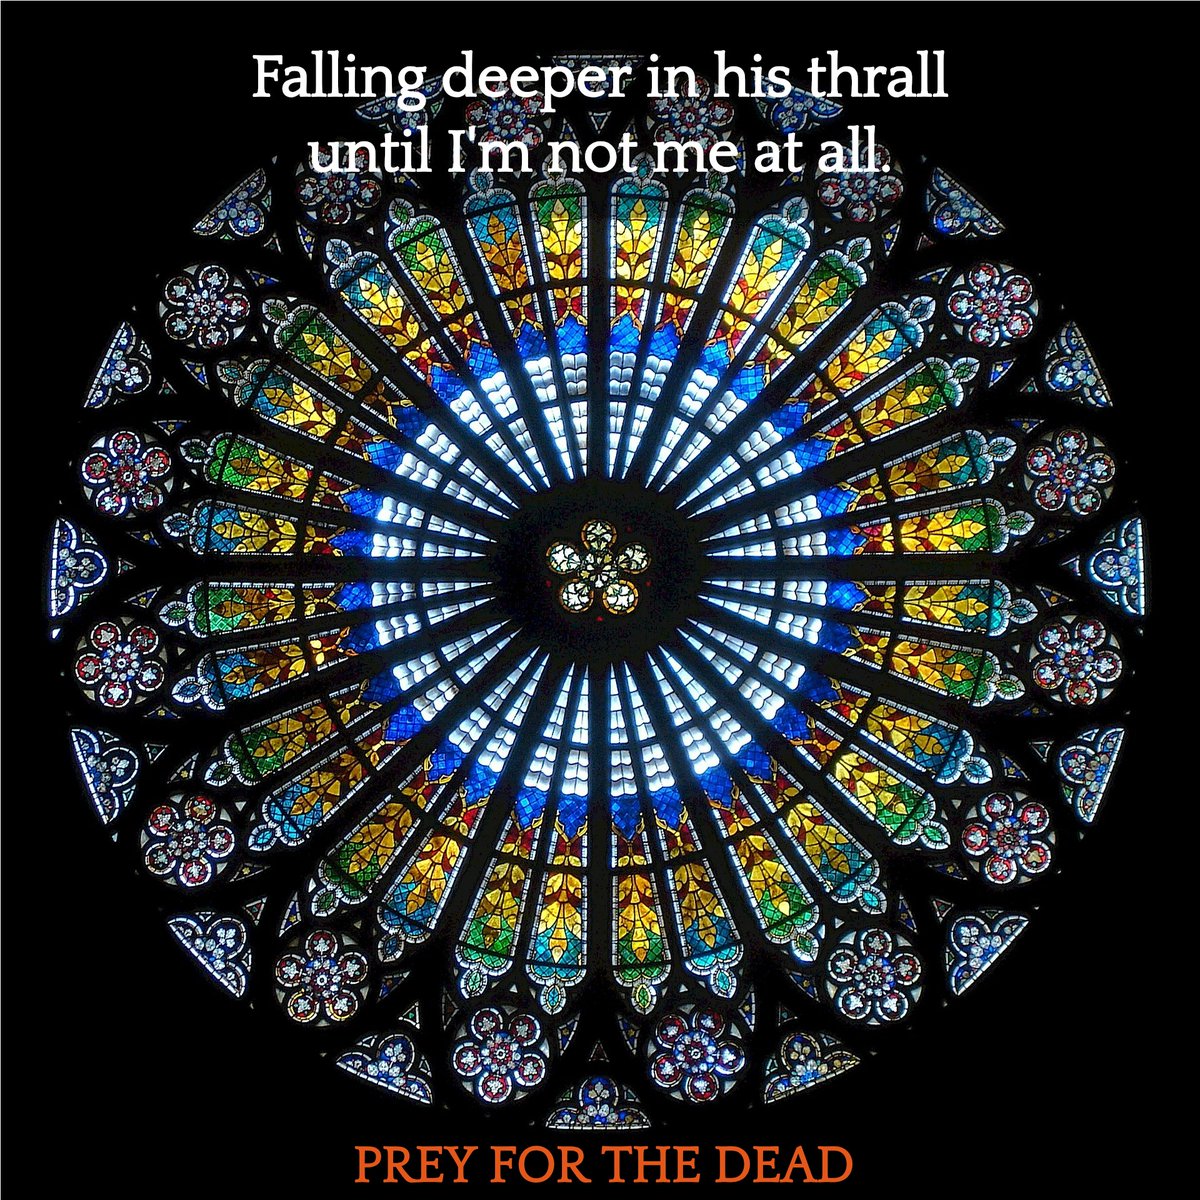 PREY FOR THE DEAD

I fall deep into his thrall
until I'm not me at all.
I must prepare for the full moon
but refuse to yield to his sweet tune.
Time is still on my side.
By his side, I won't reside.

amzn.to/2YHf3Uz

#RomanceReaders #PNR #RomanceNovel